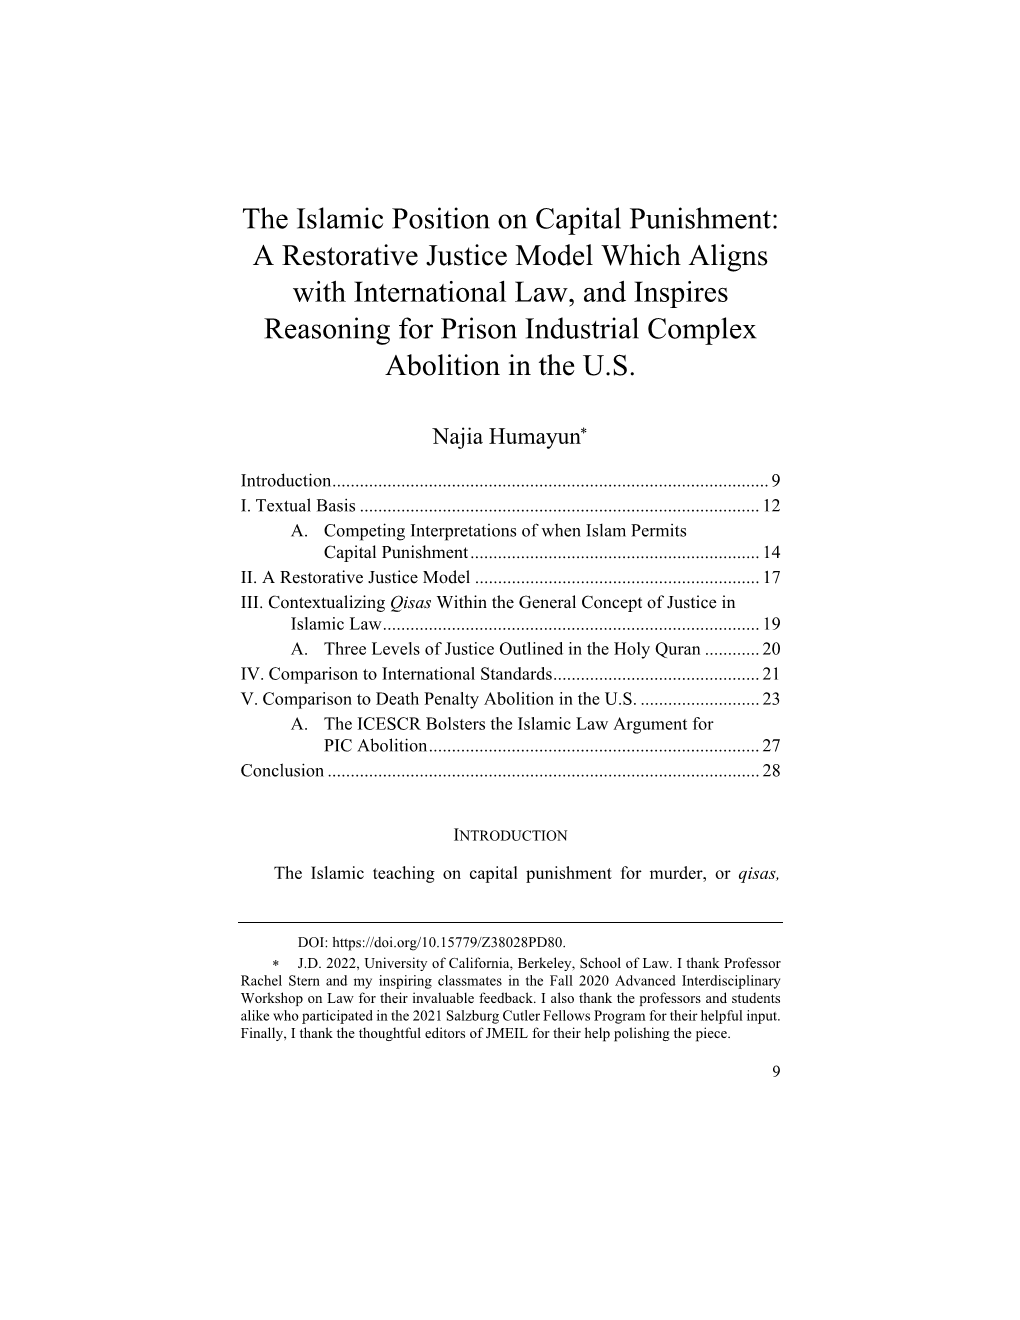 The Islamic Position on Capital Punishment: a Restorative Justice